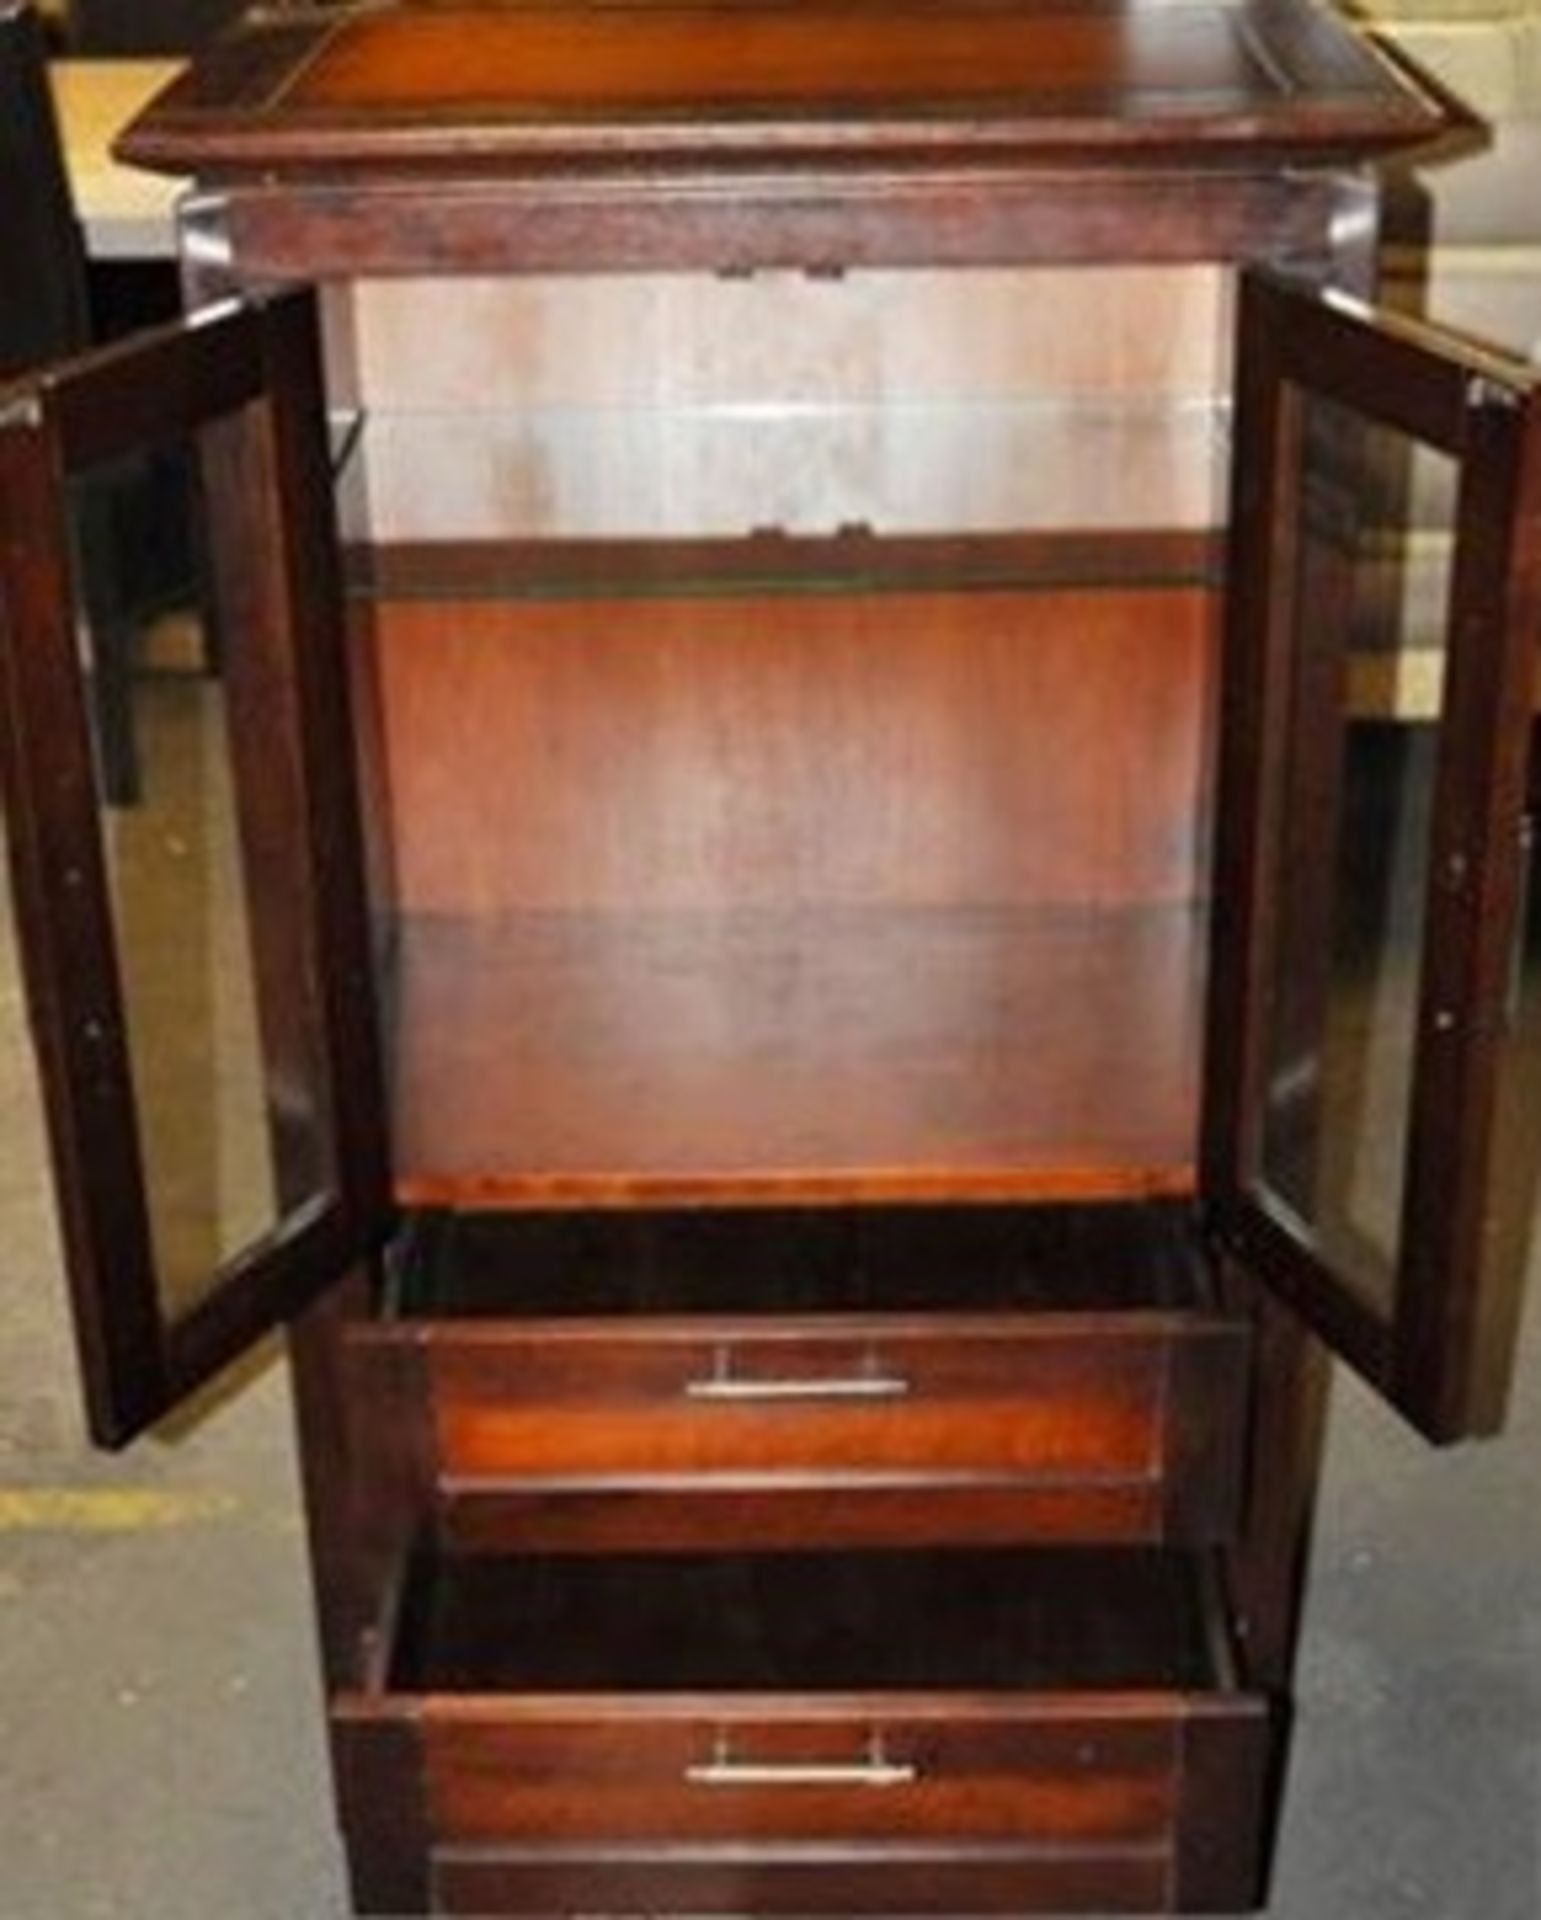 1 x Henley Traditional Red Mahogany Drinks Cabinet by Bentley Designs – Comes with Drawers & Glass - Image 3 of 7